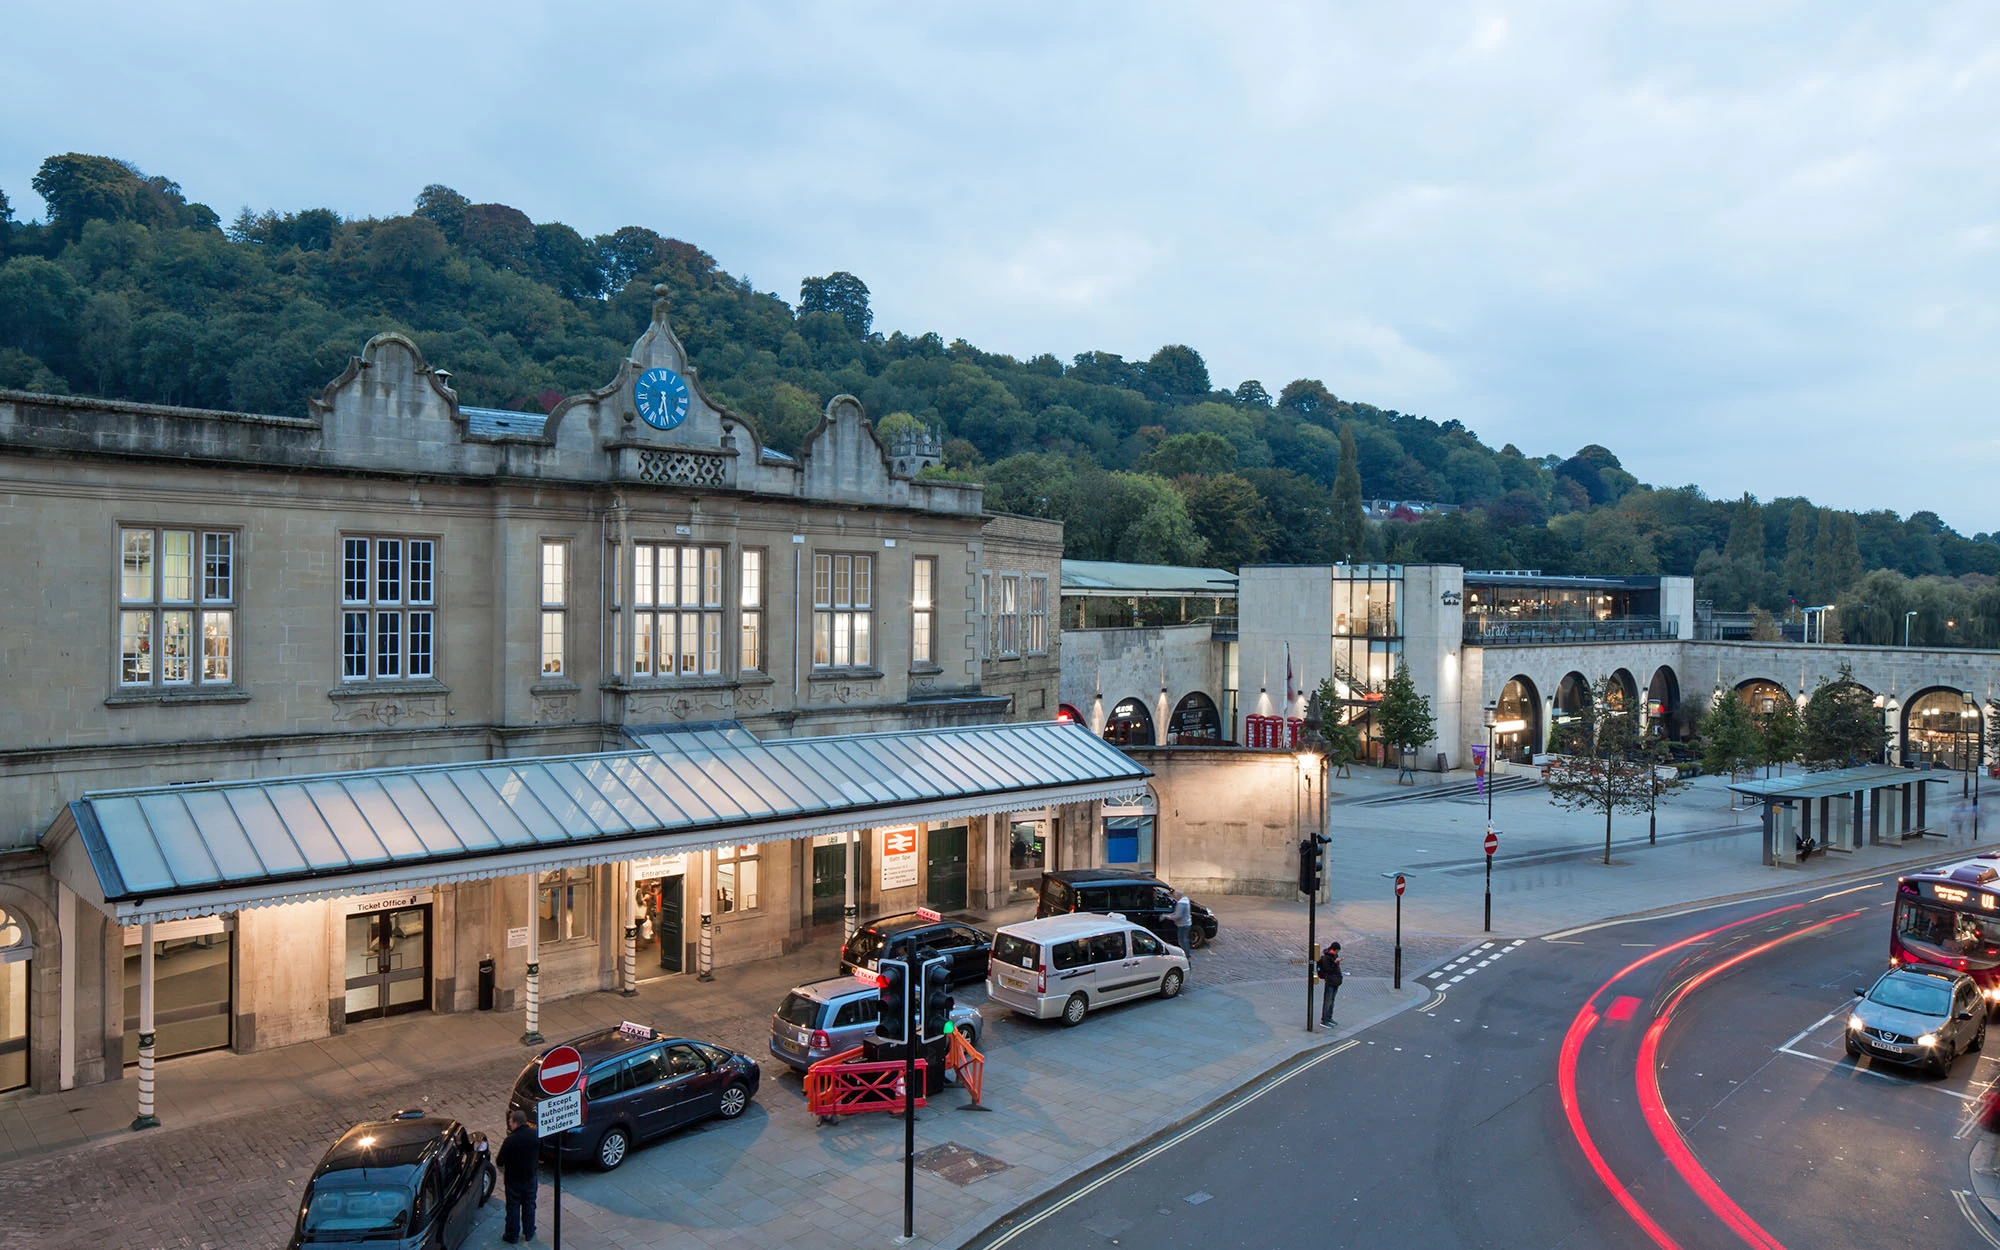 Context image of the Bath Railway Station